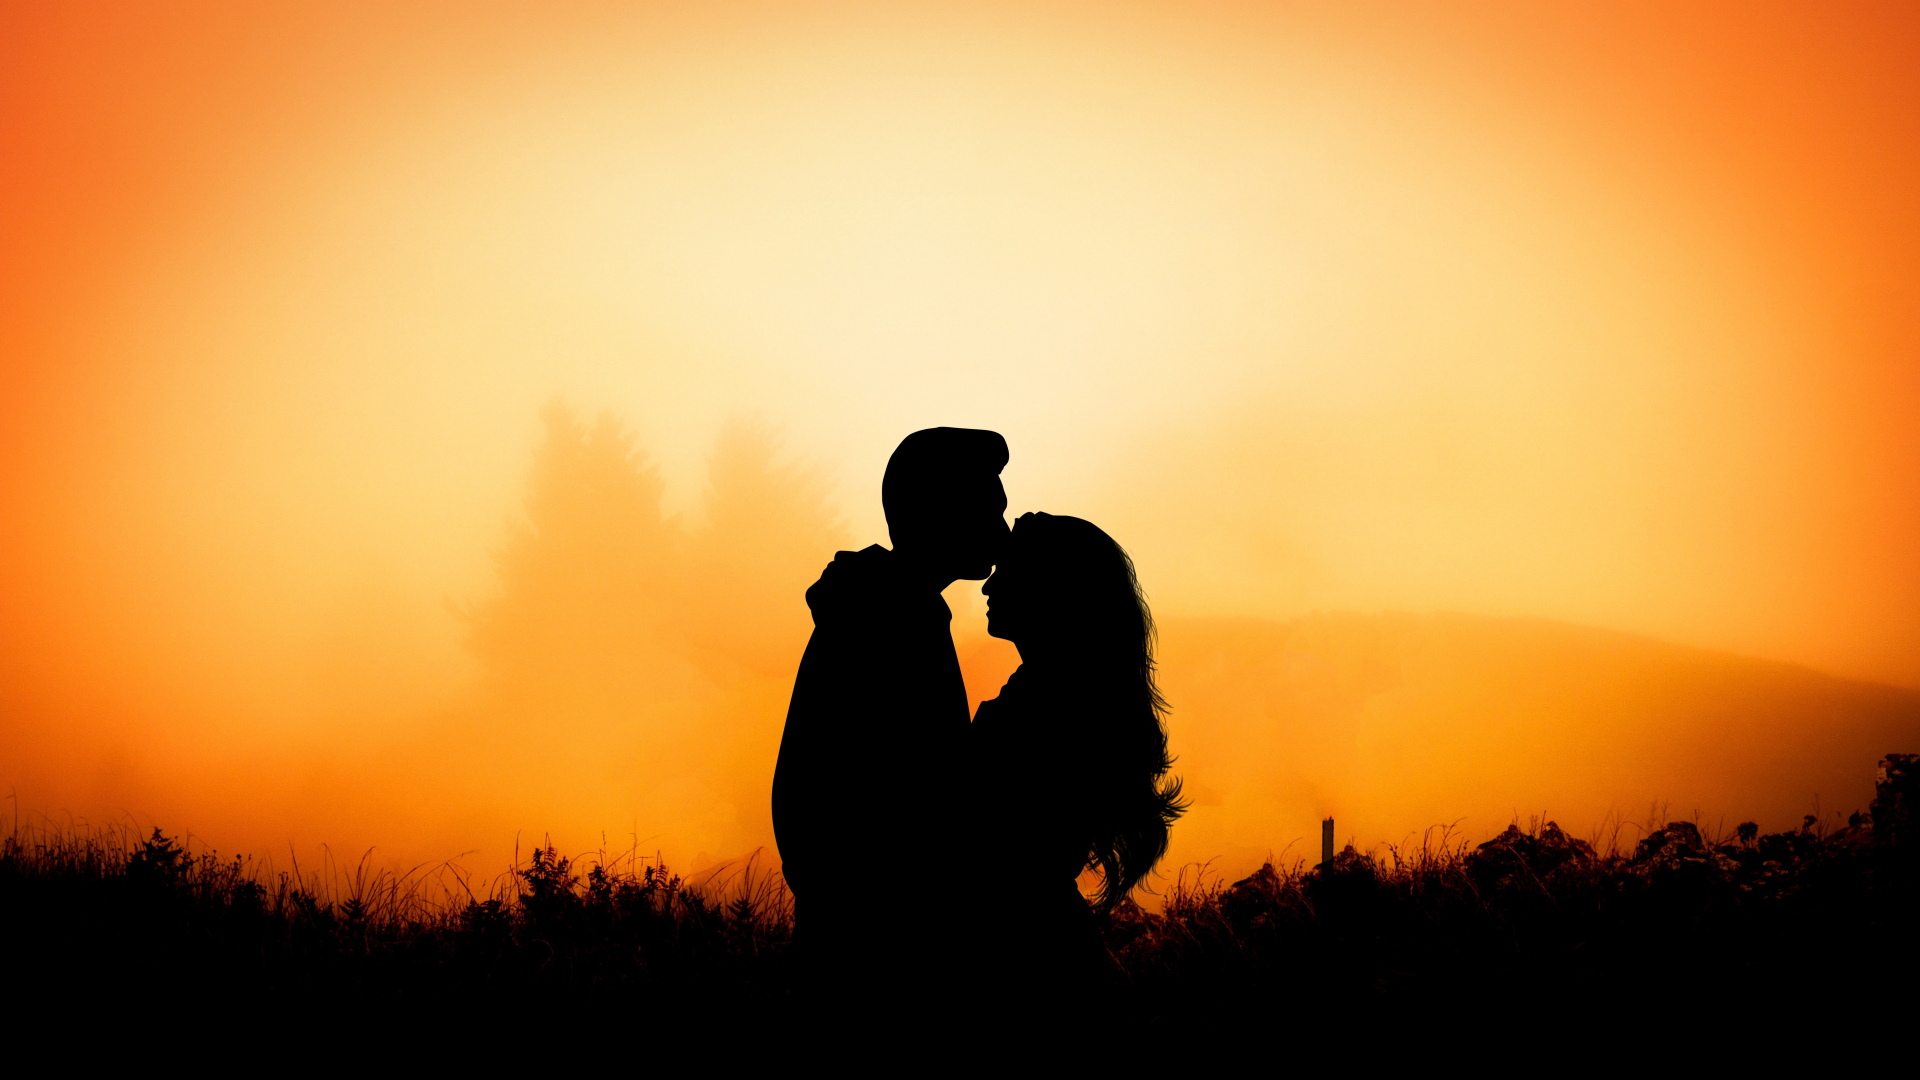 Download 1920x1080 Wallpaper Couple Hug Kiss Love Outdoor Sunset Full Hd Hdtv Fhd 1080p 1920x1080 Hd Image Background 2974